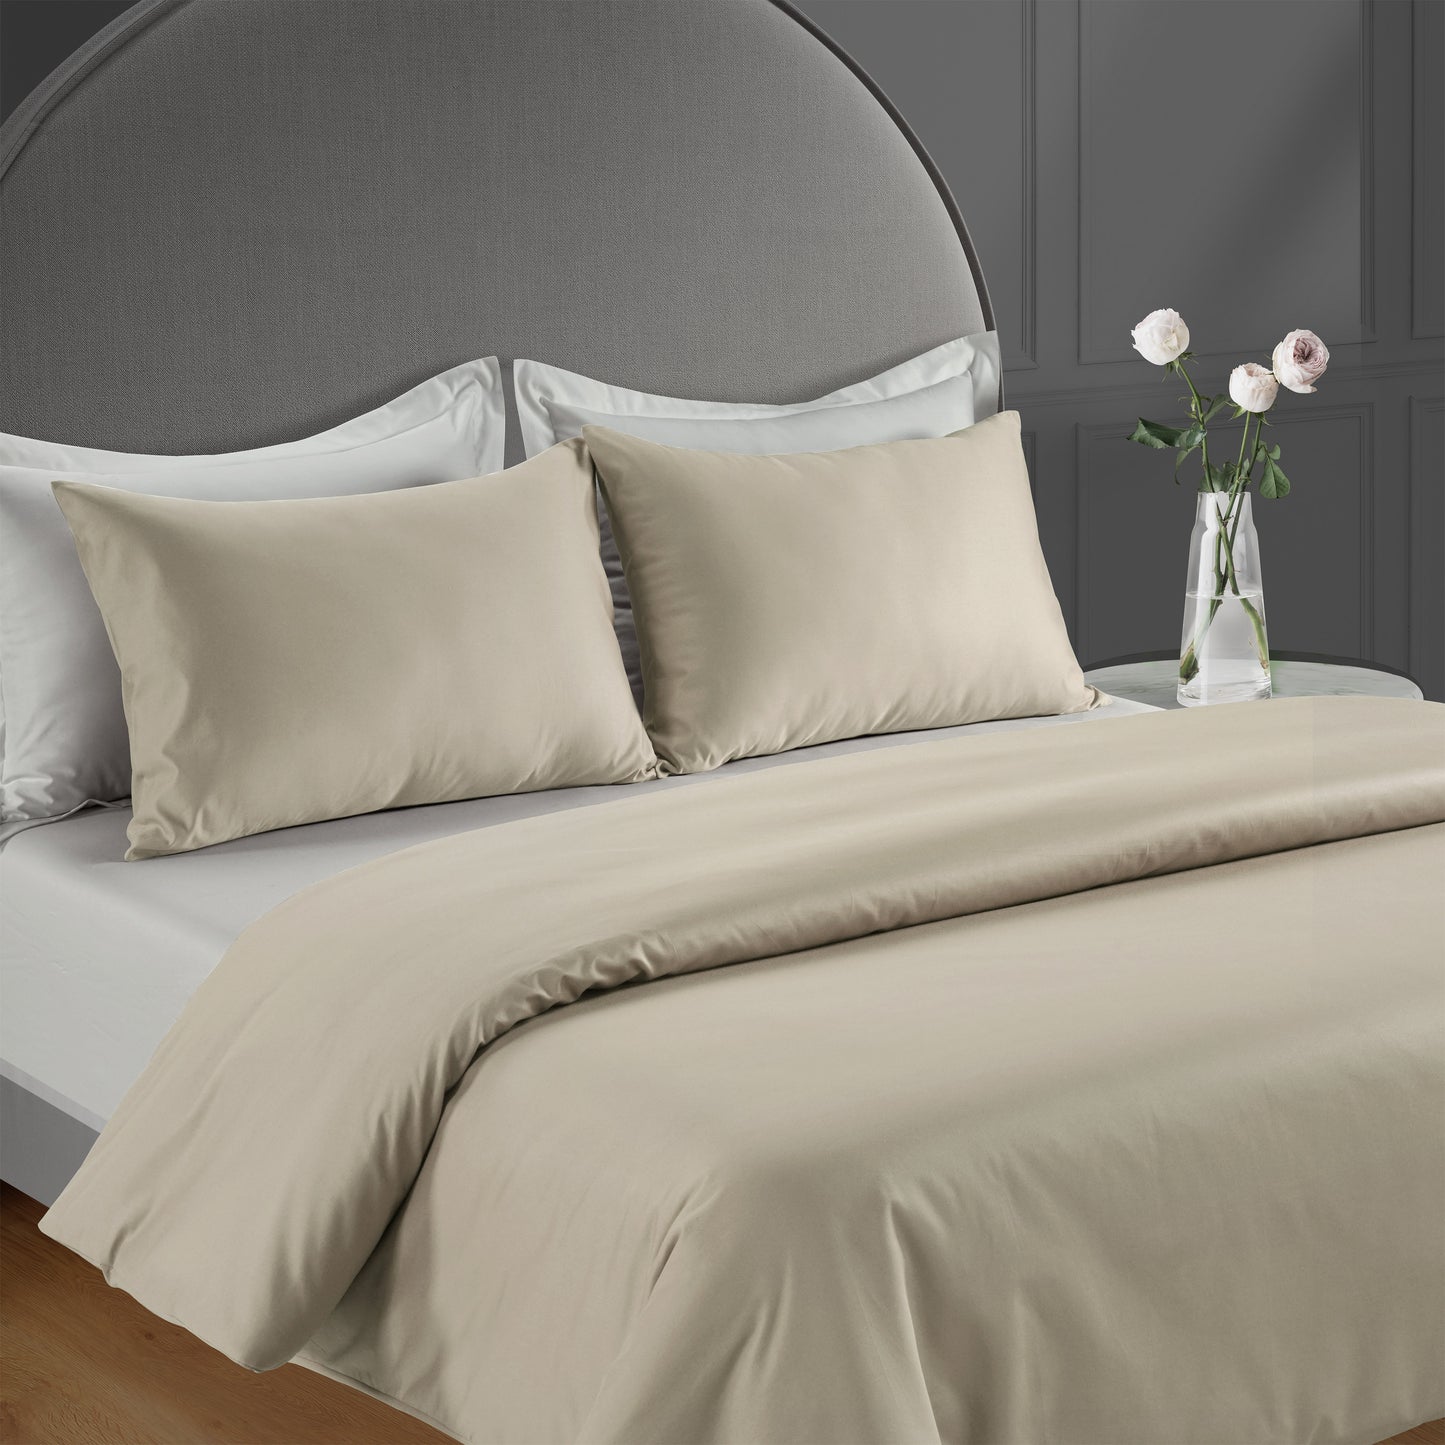 300 Thread Count Peaceful Empress - Oatmeal with Oyster Mushroom Bedding Set